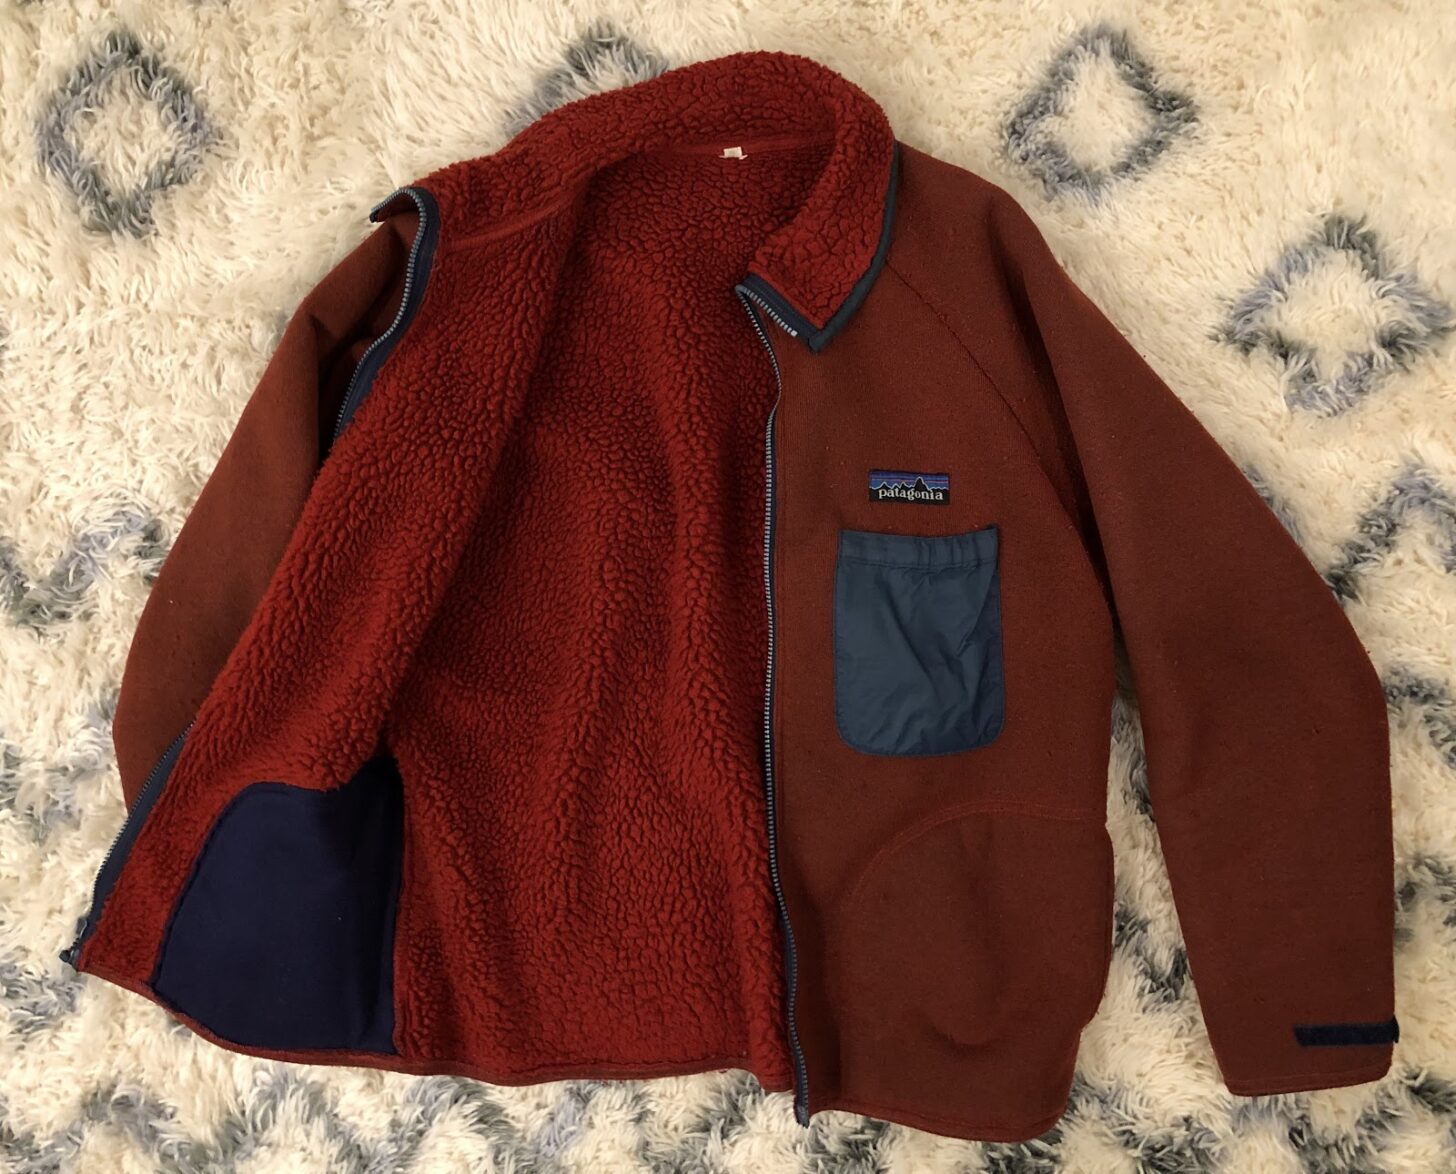 a red jacket